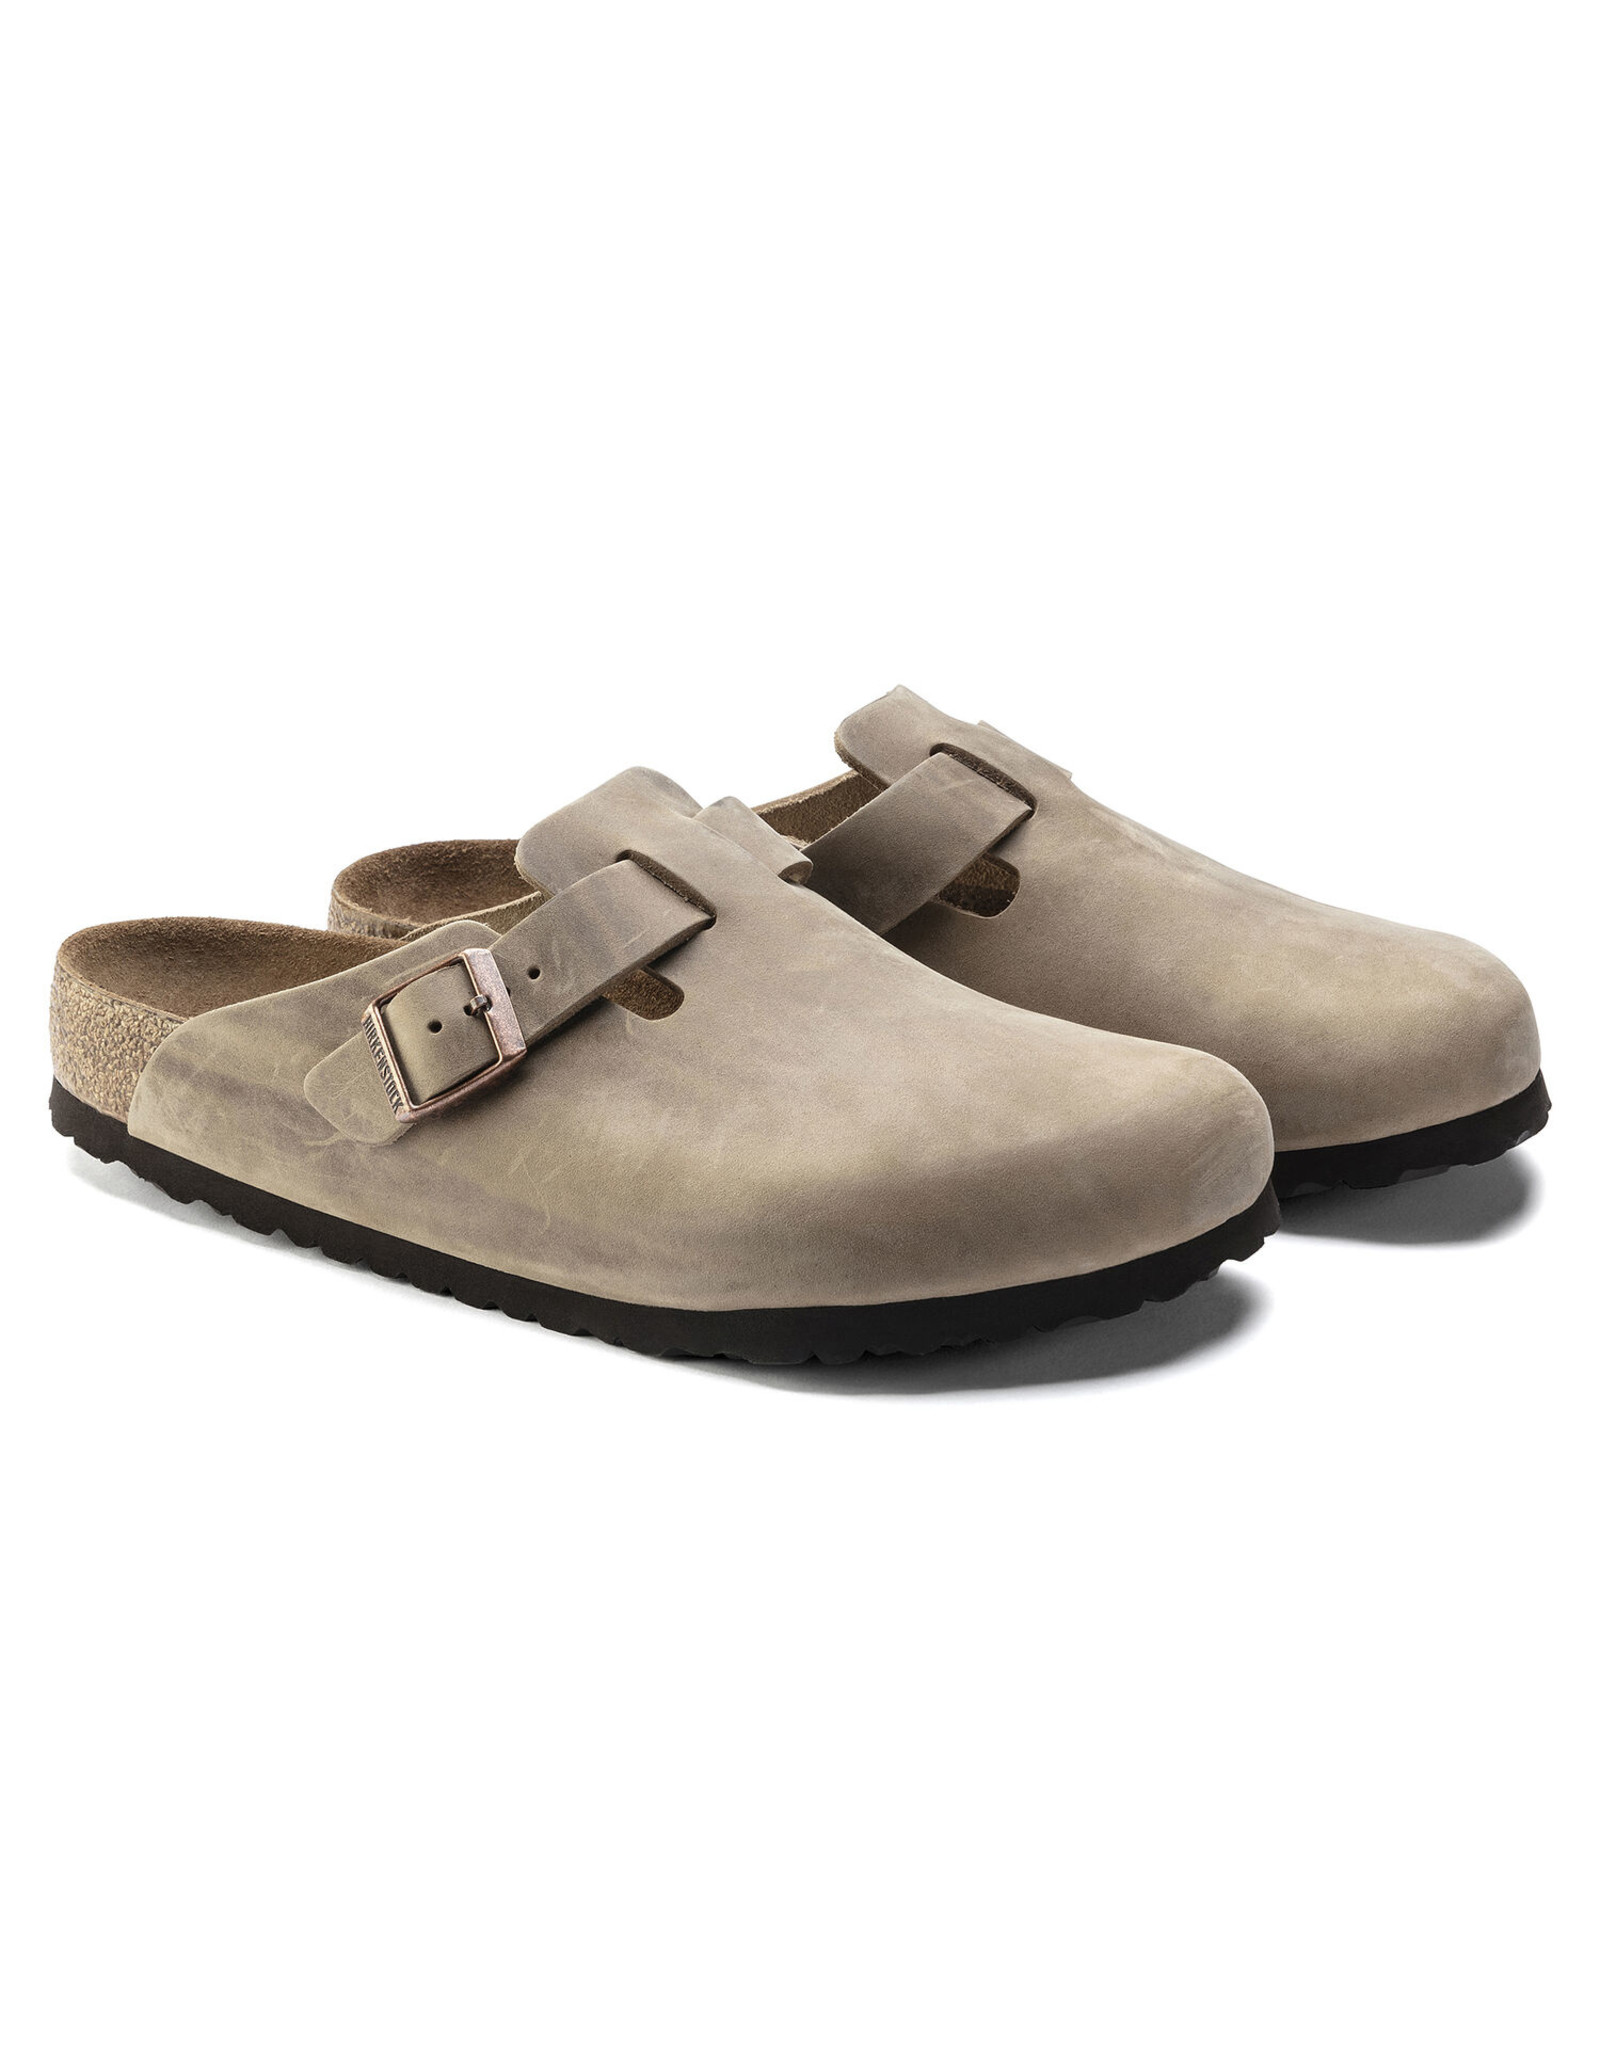 BIRKENSTOCK BOSTON SOFT FOOTBED OILED LEATHER-TOBACCO BROWN